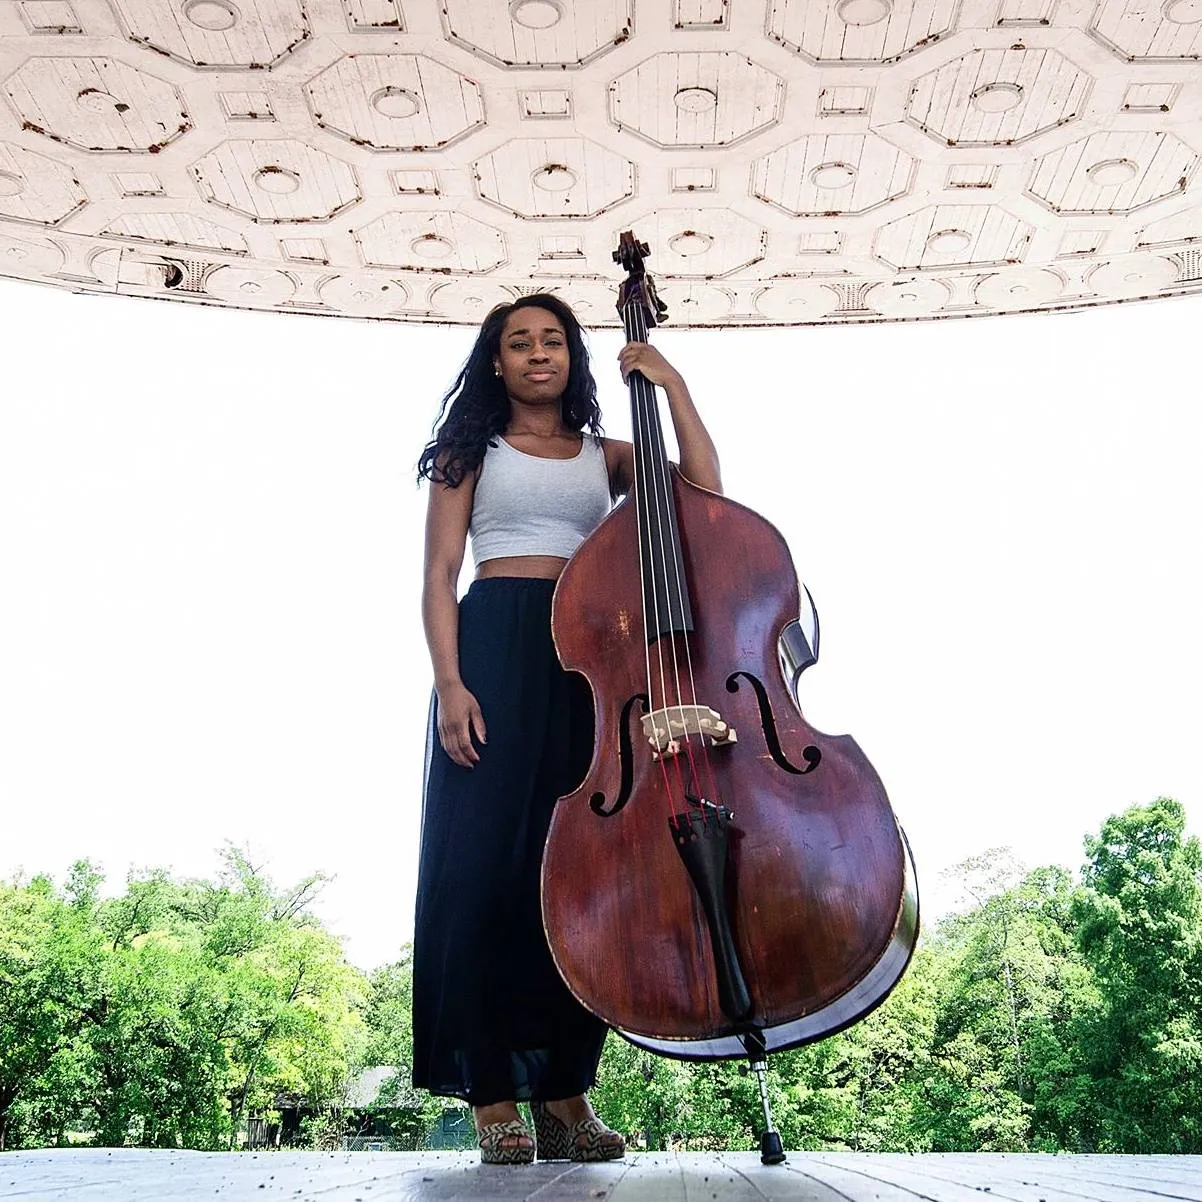 A woman standing and holding an upright bass